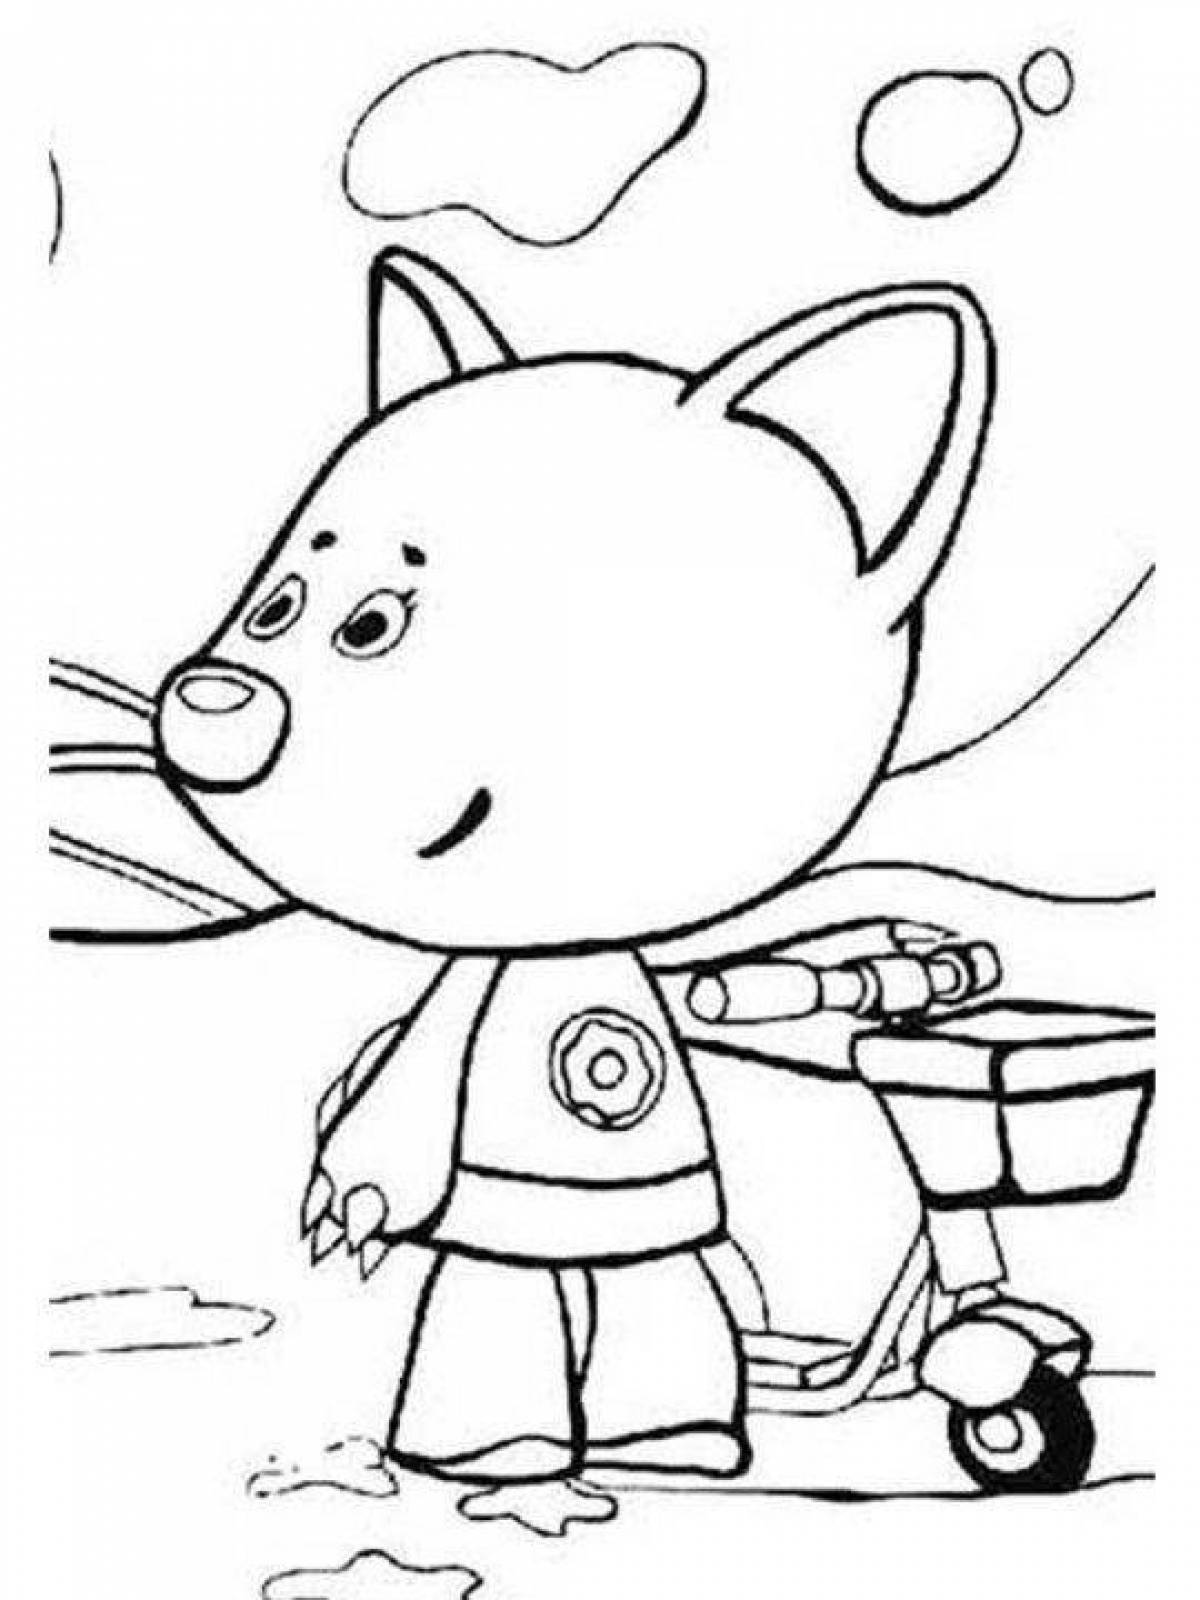 Crazy bear coloring pages for kids